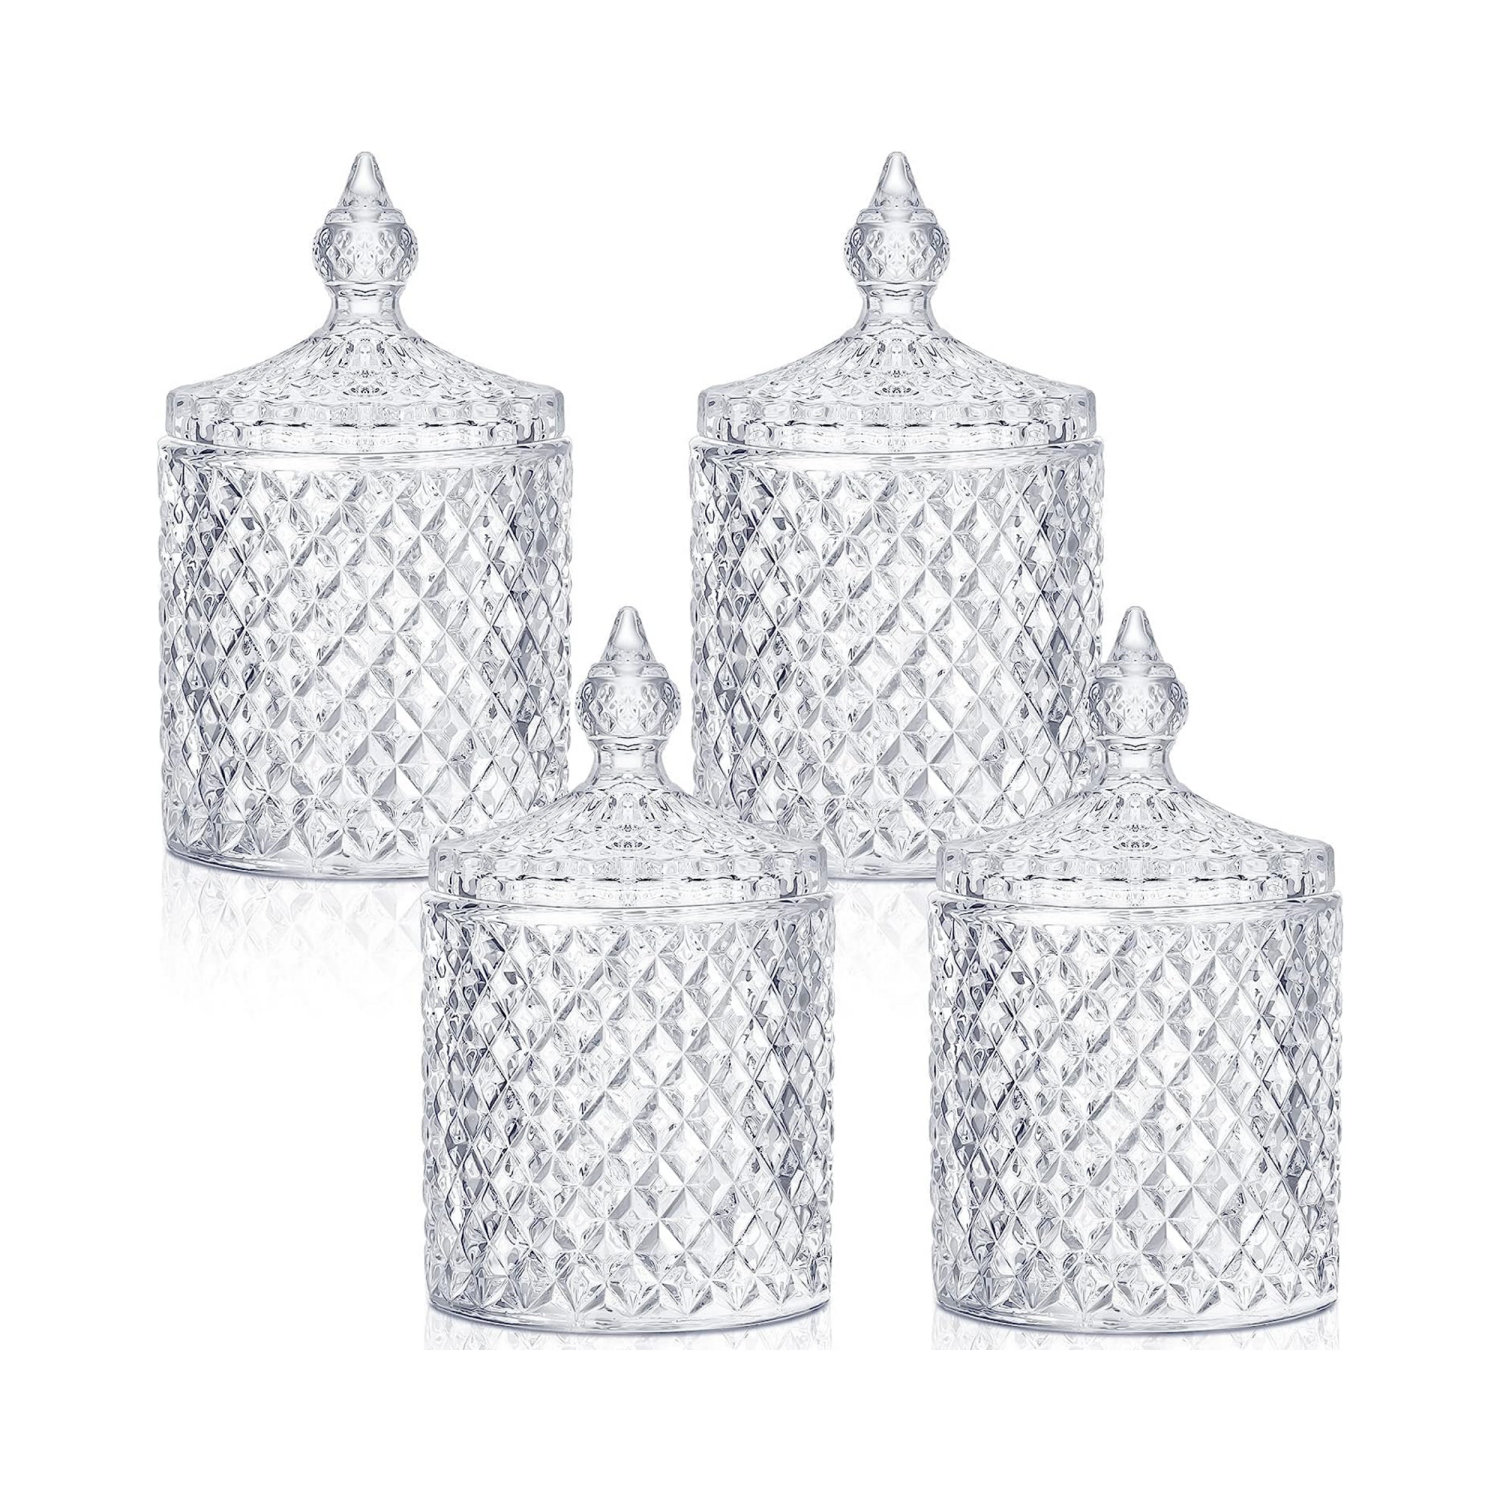 Glass Candy Jars With Lids